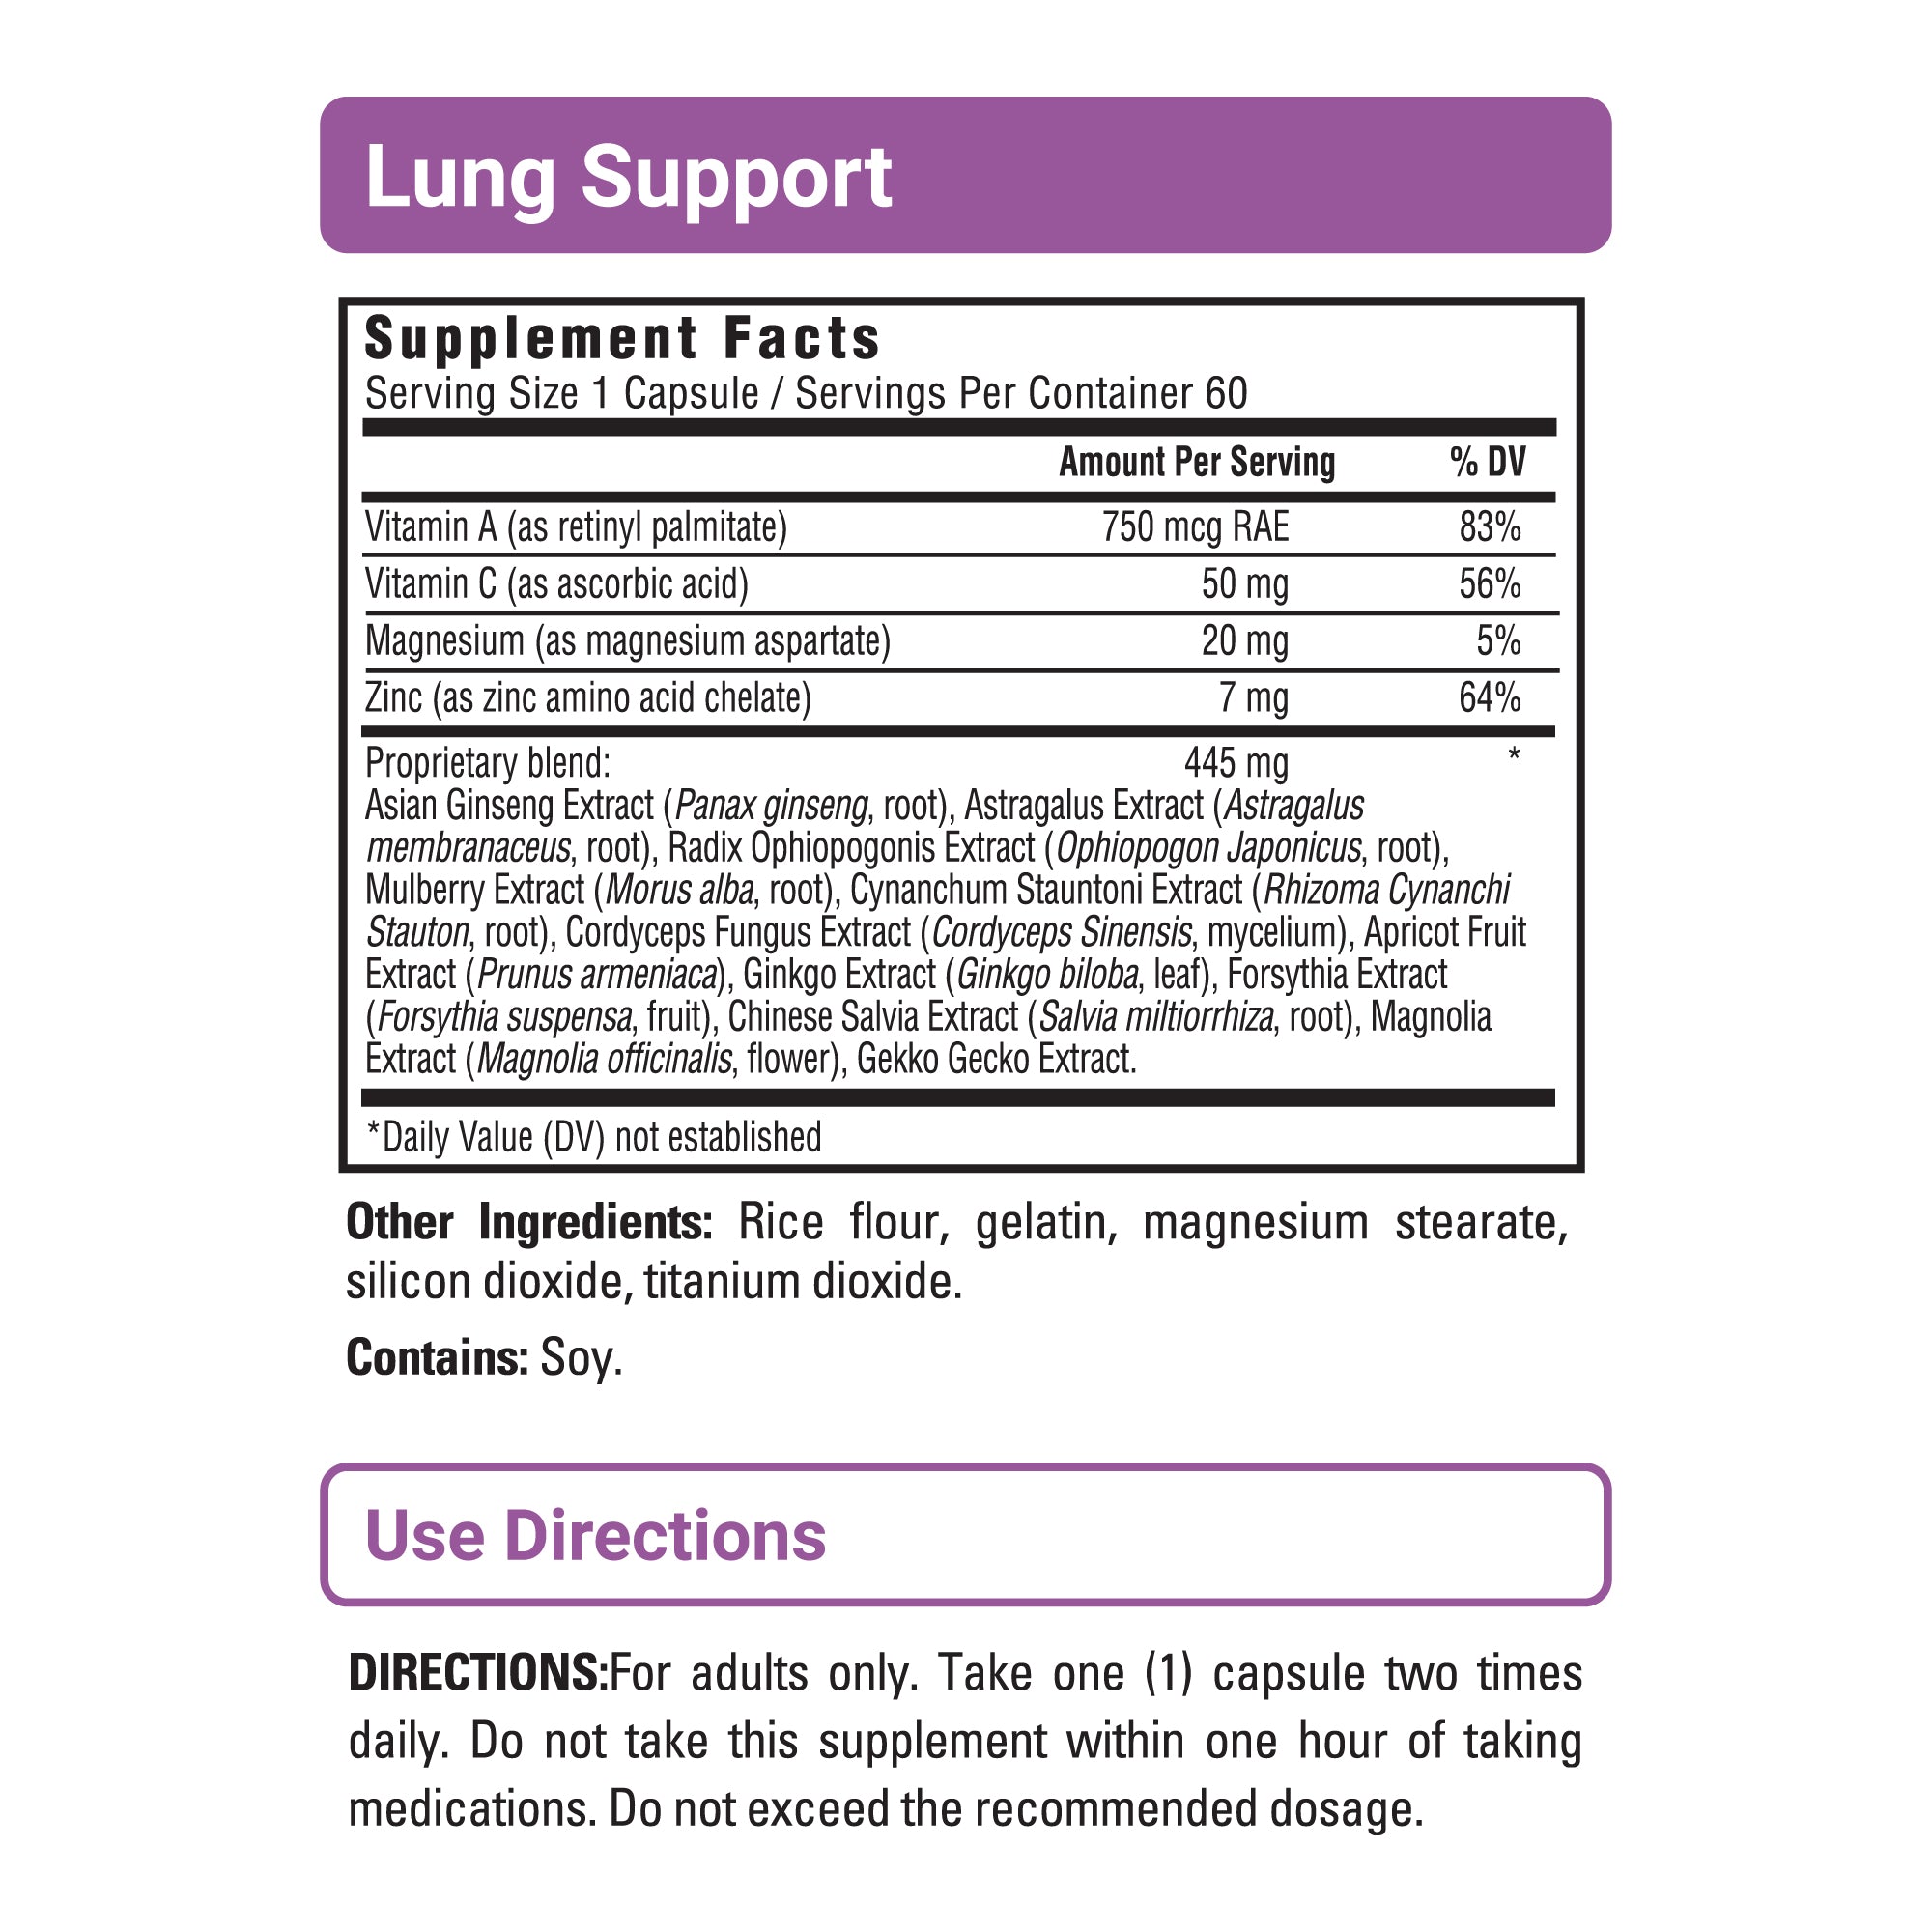 Lung Support sup facts